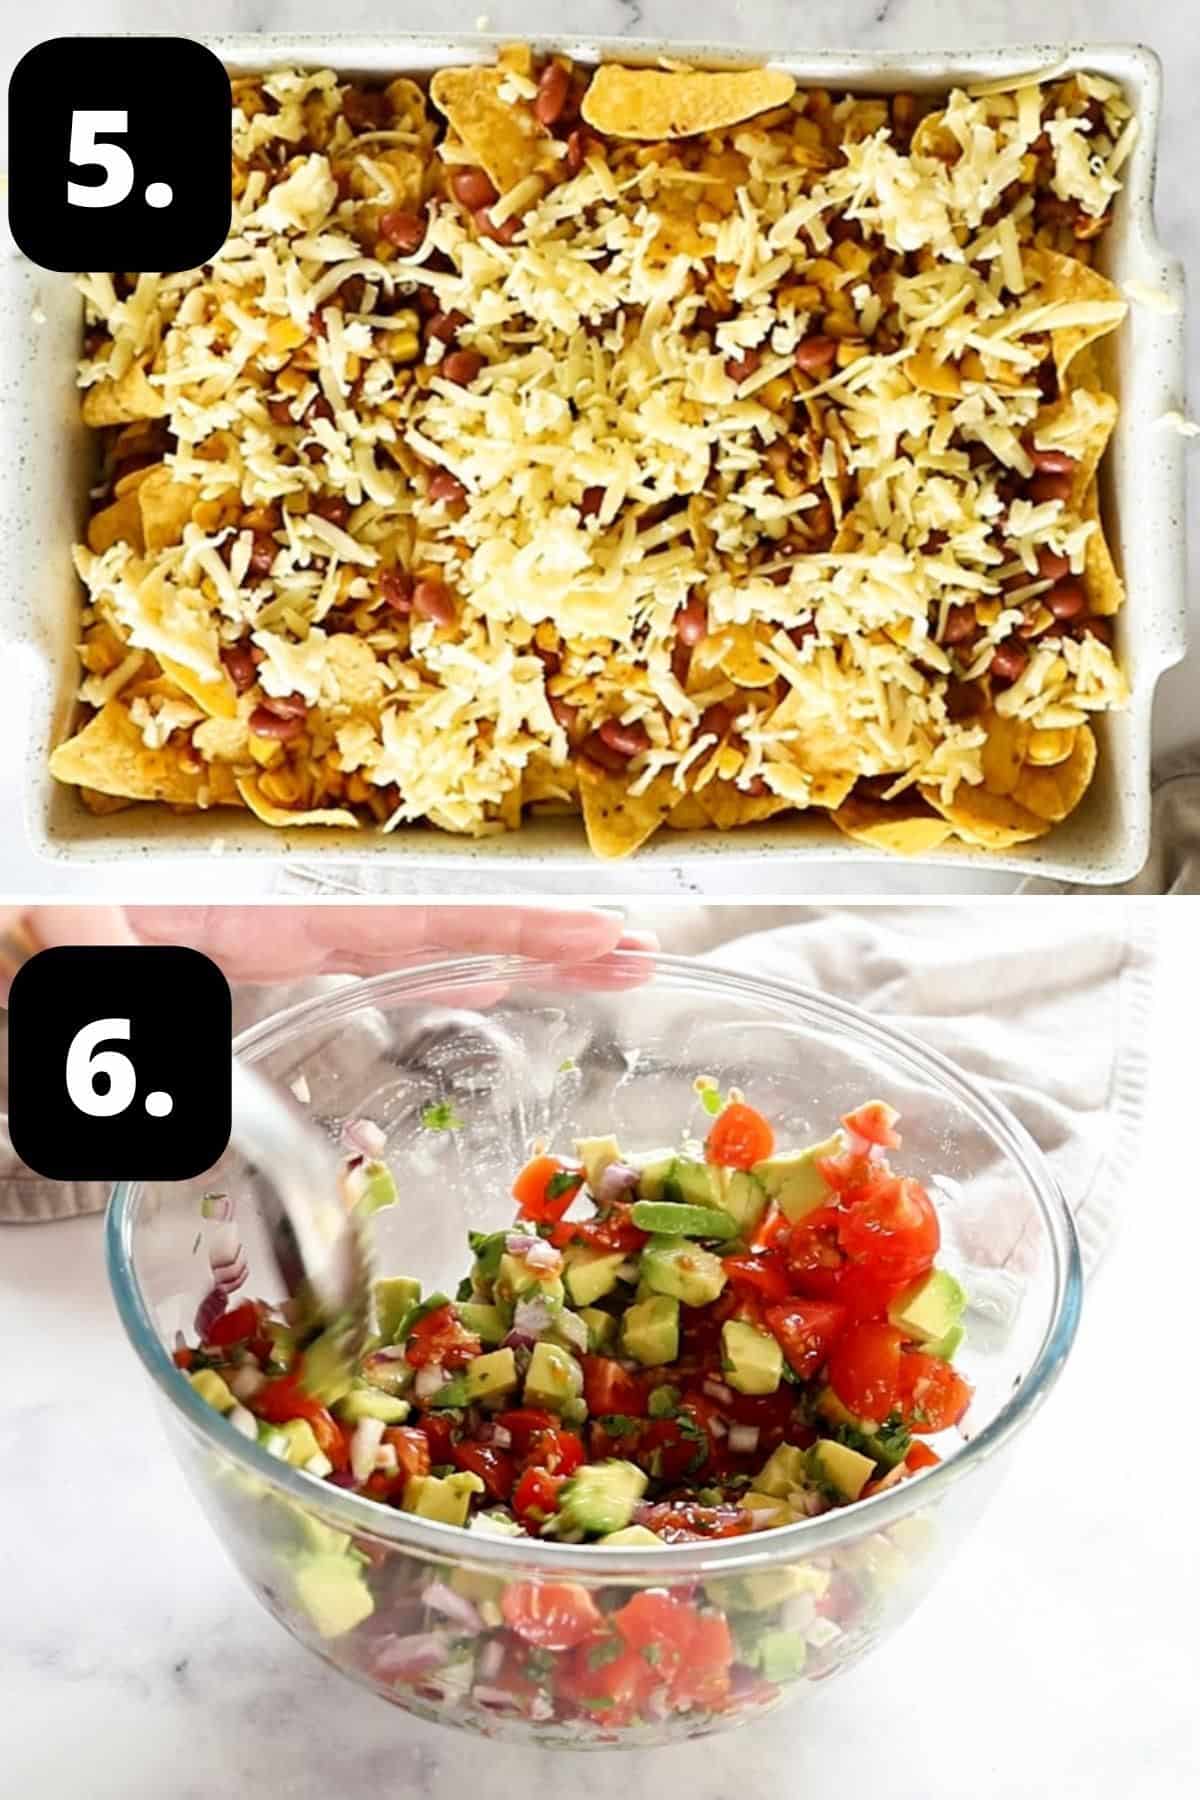 Steps 5-6 of preparing this recipe: the final layer of chips, cheese and beans and making the salsa topping in a glass bowl.